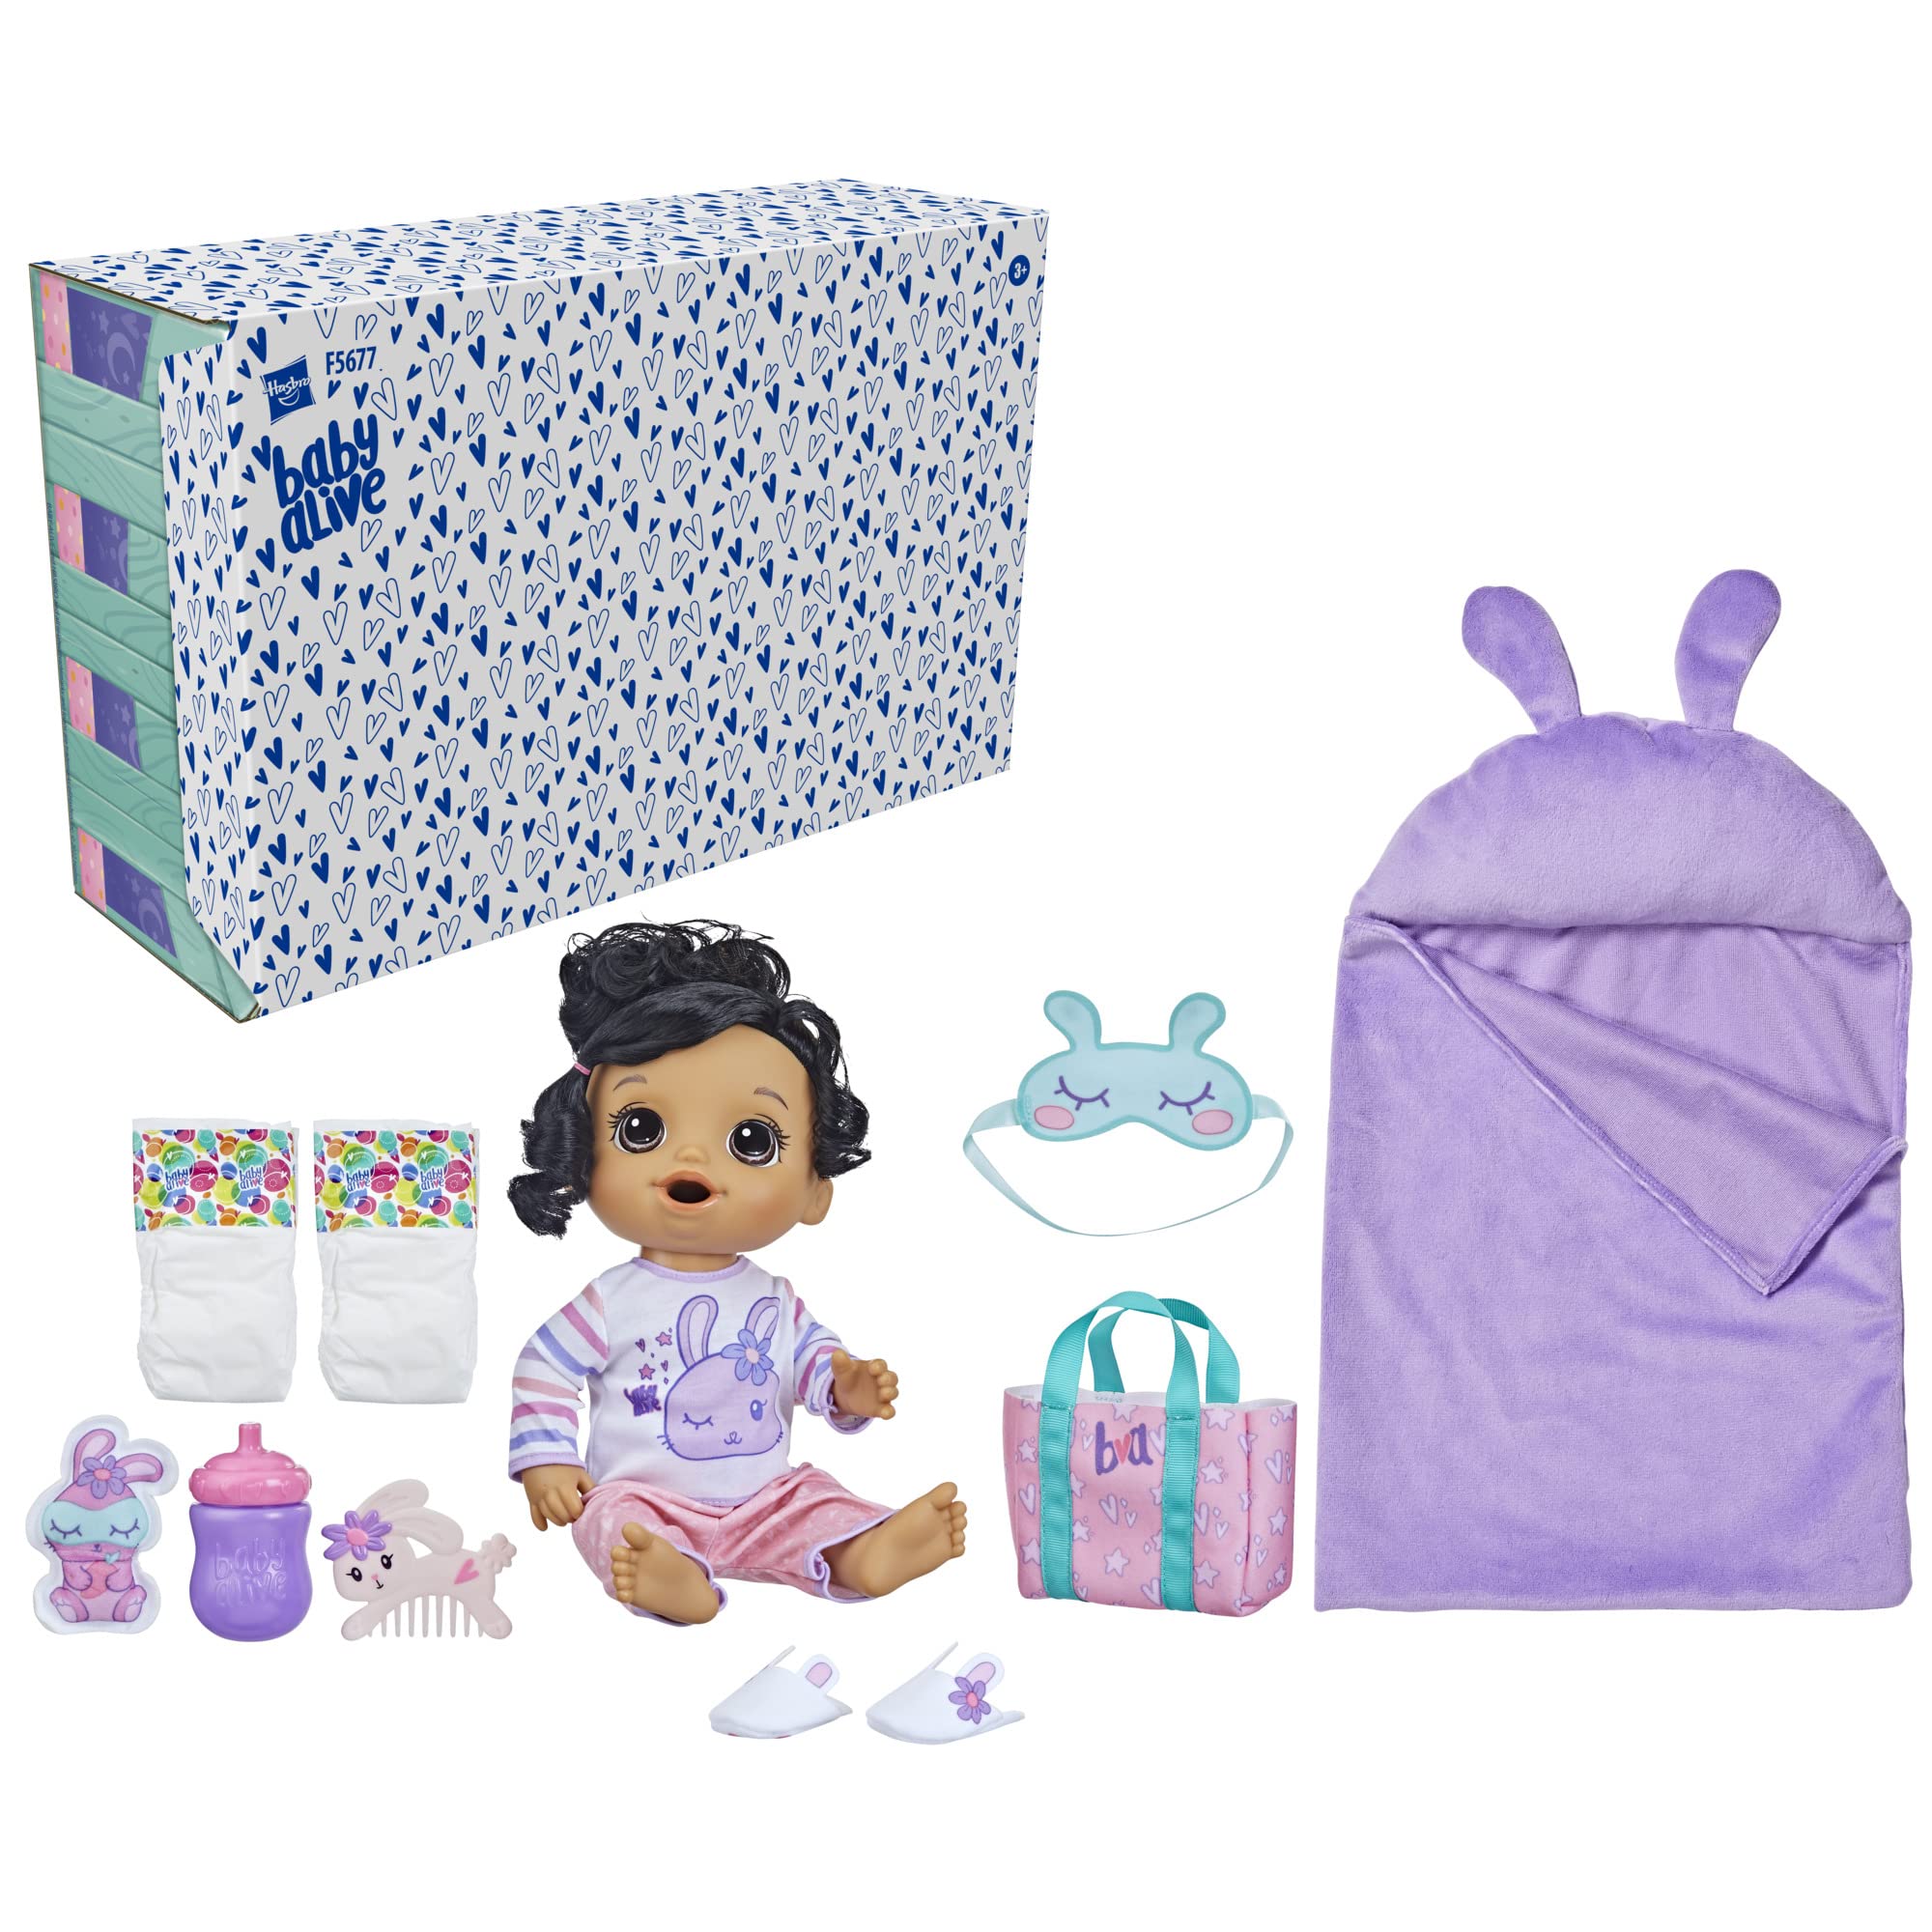 Baby Alive Bunny Sleepover Baby Doll, Bedtime-Themed 12-Inch Dolls, Sleeping Bag & Bunny-Themed Doll Accessories, Toys for 3 Year Old Girls and Boys and Up, Brown Hair (Amazon Exclusive)